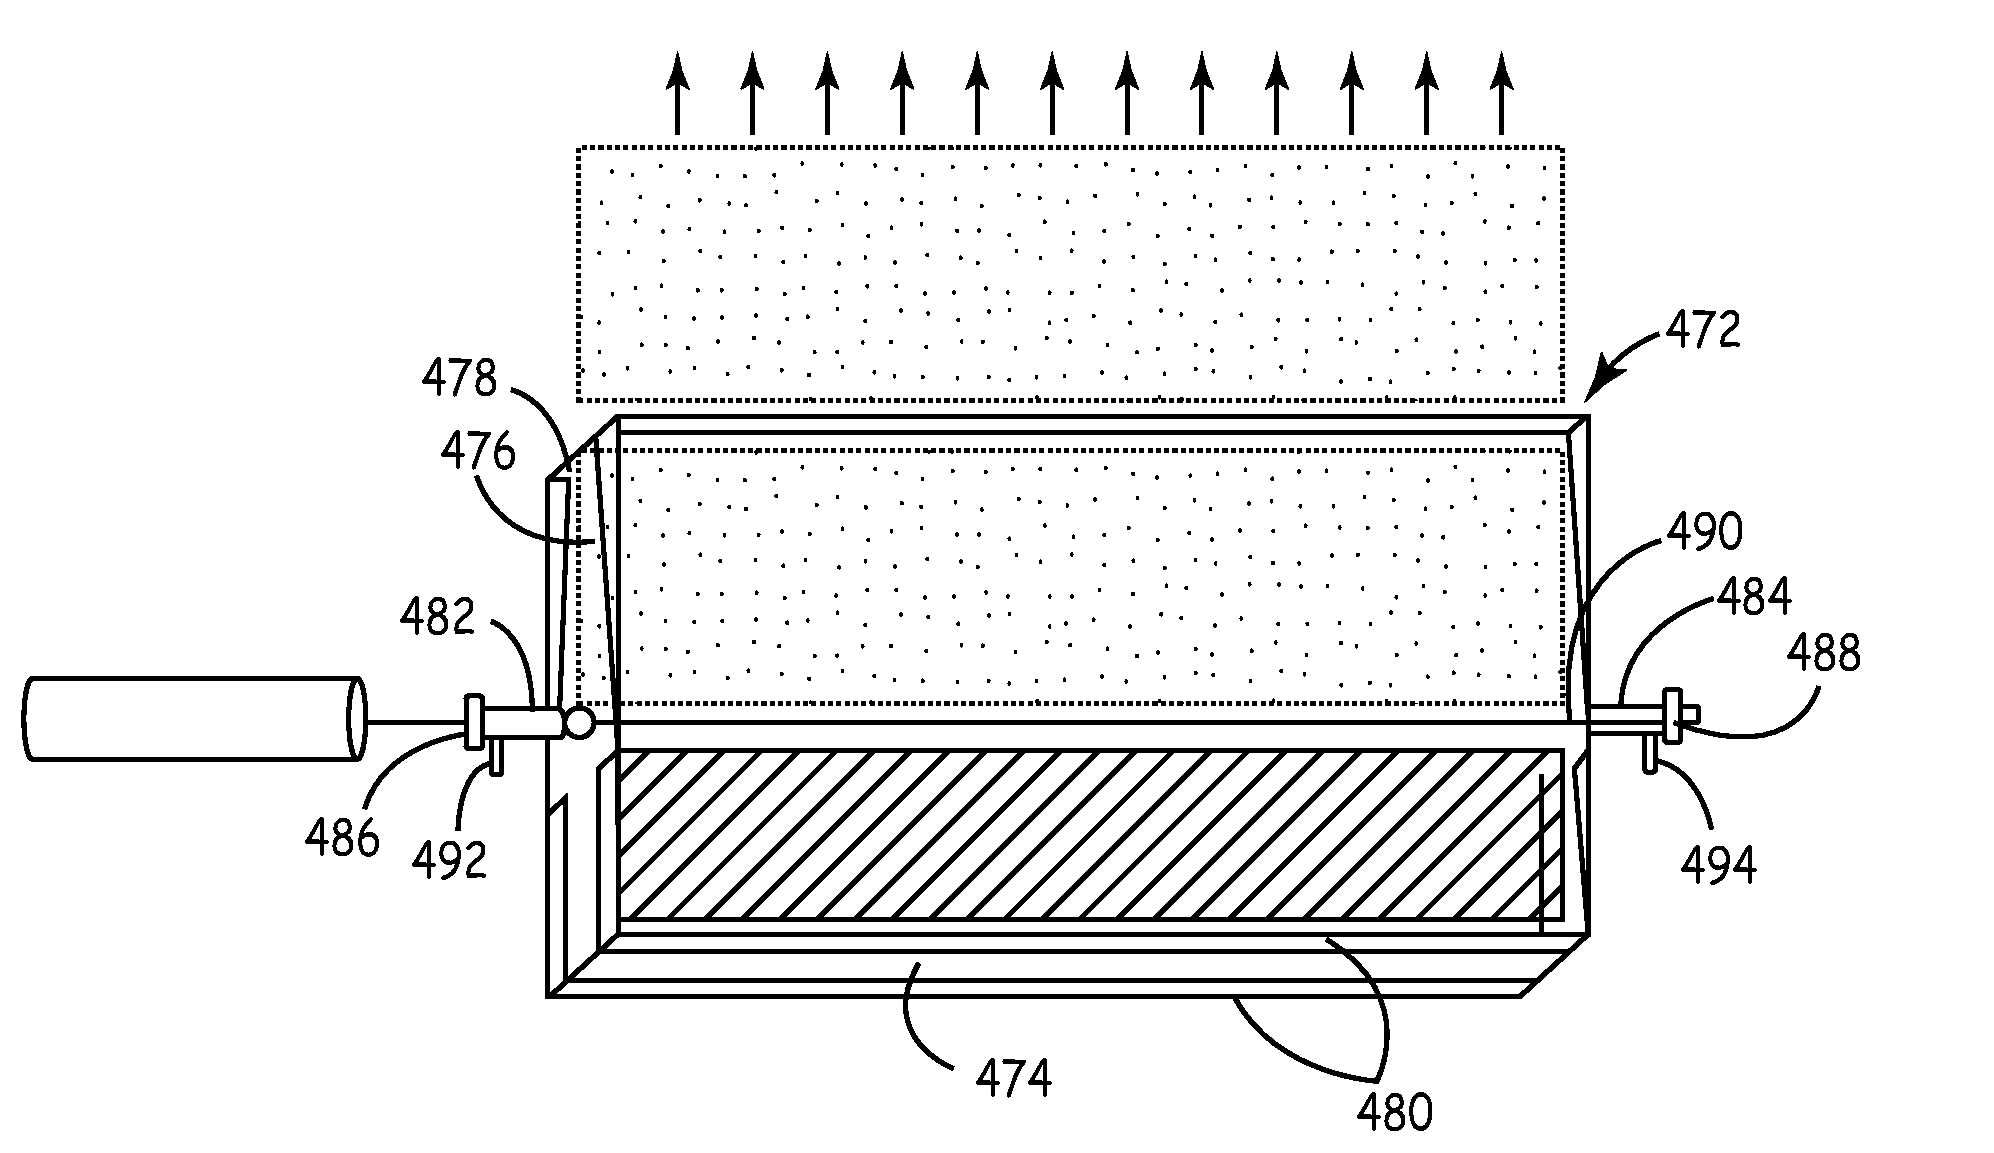 Methods for synthesizing submicron doped silicon particles